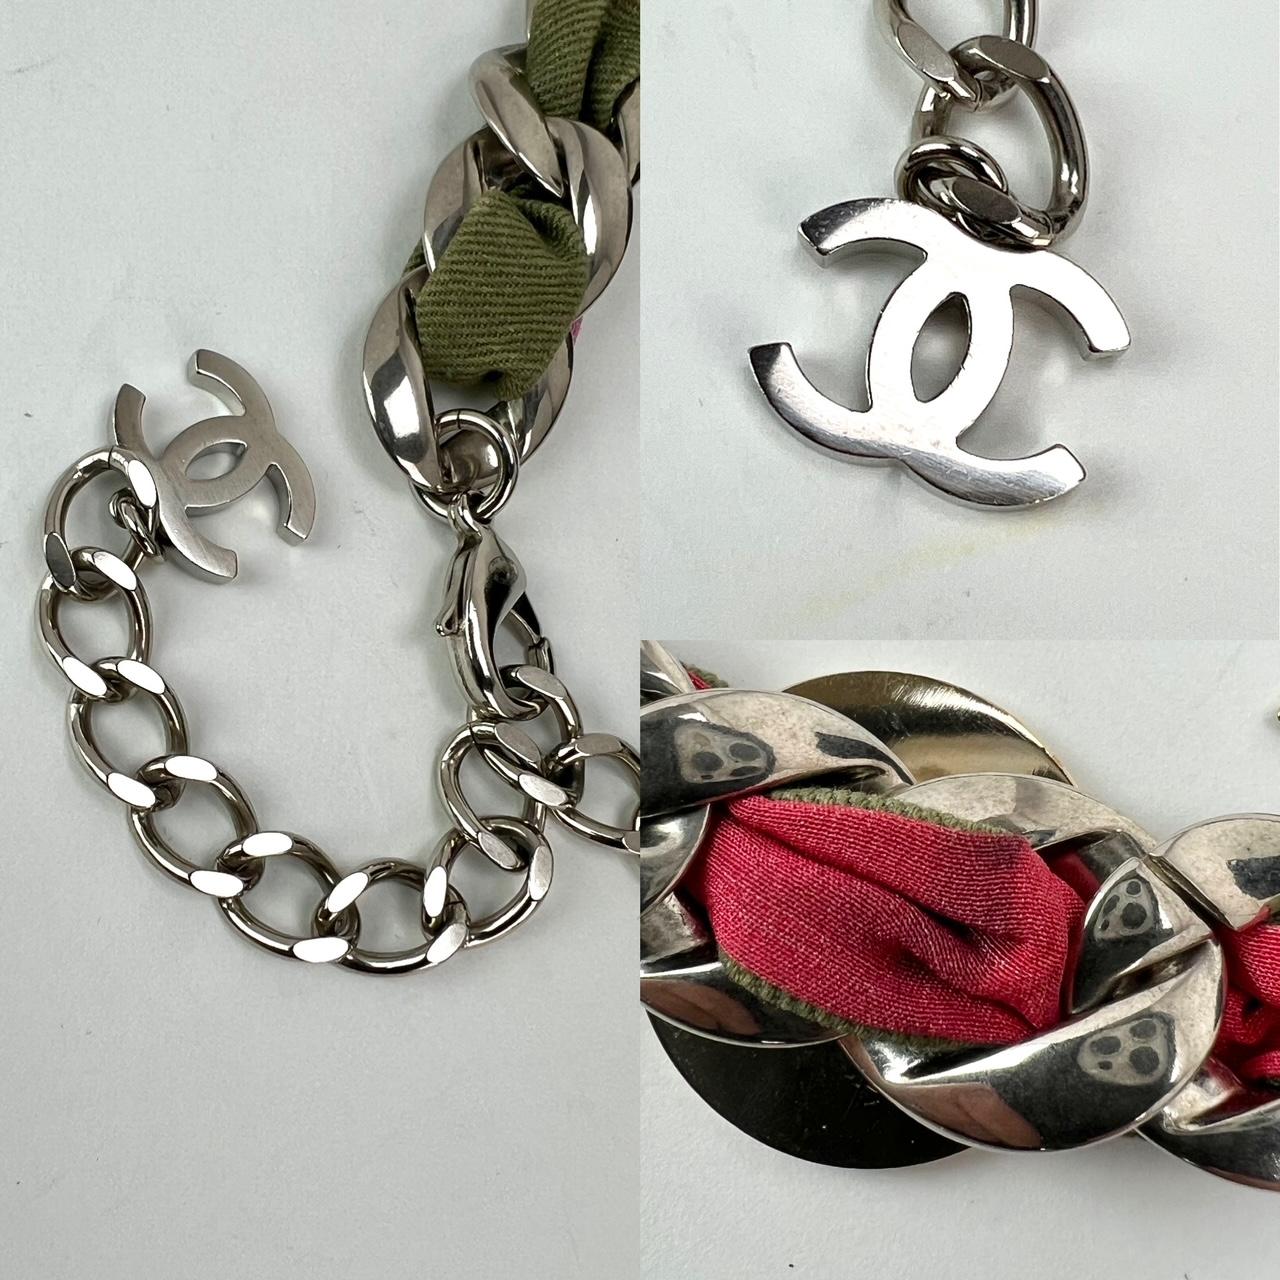 Preowned 100% Authentic 
Chanel Metal Fabric Strass Pearl Cuba CC Chain Link Chocker Necklace
RATING: A/B...Very Good, shows minimal signs of use
CONDITION: a small dot mark on 1 piece of red fabric in the back
HARDWARE: silver, minimal